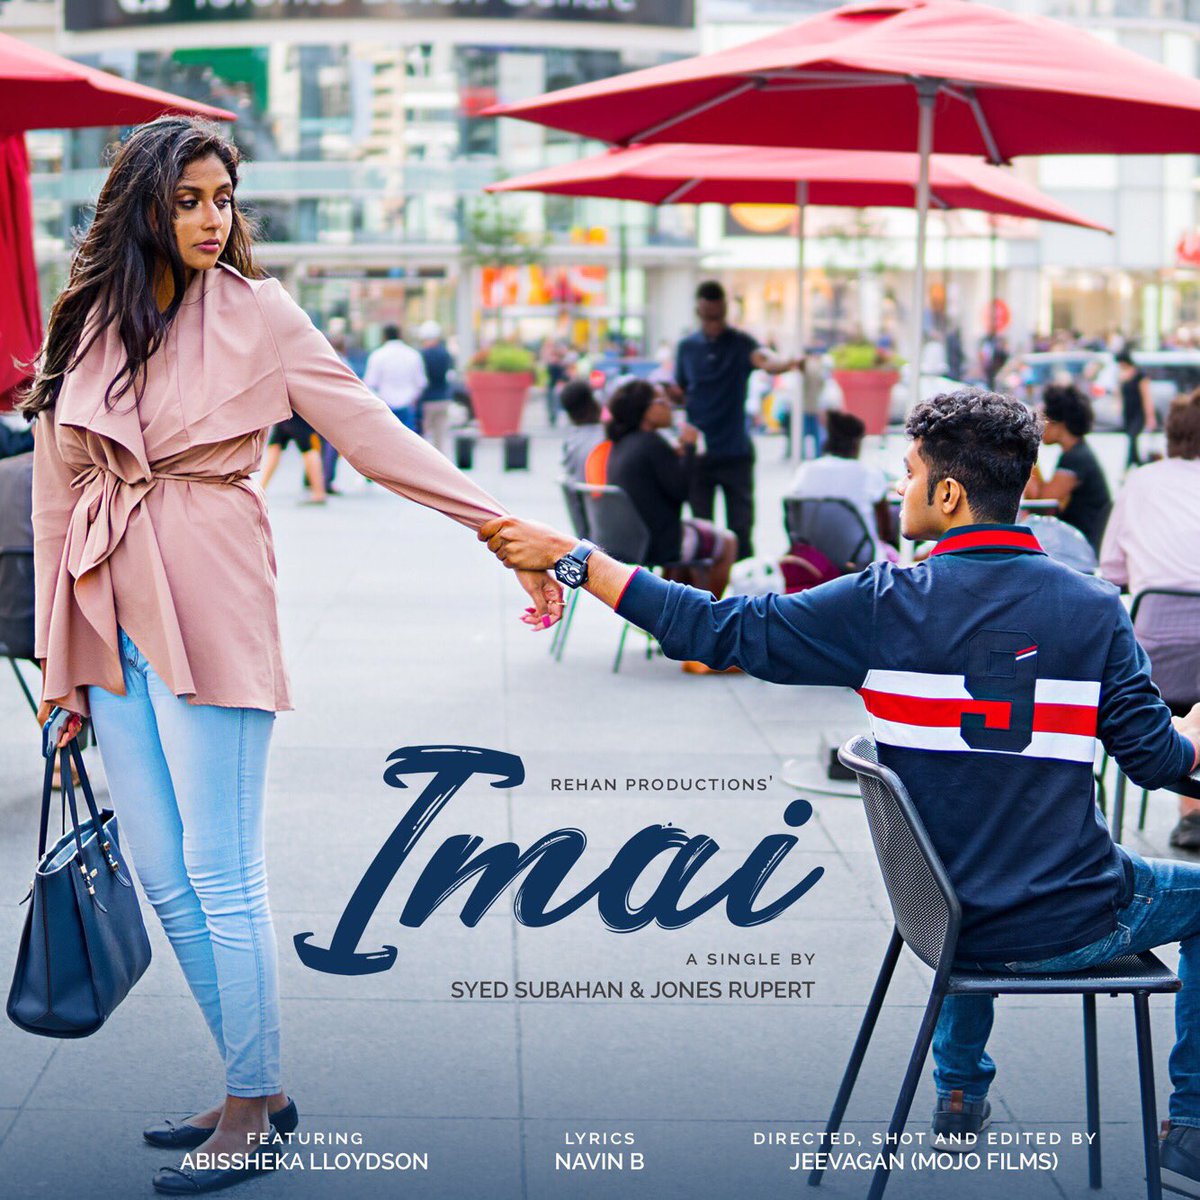 Hi guysss 😄 Super delighted to present to you the poster of ‘Imai’ 😊 My upcoming independent music video ! Need your Love and support throughout ❤️